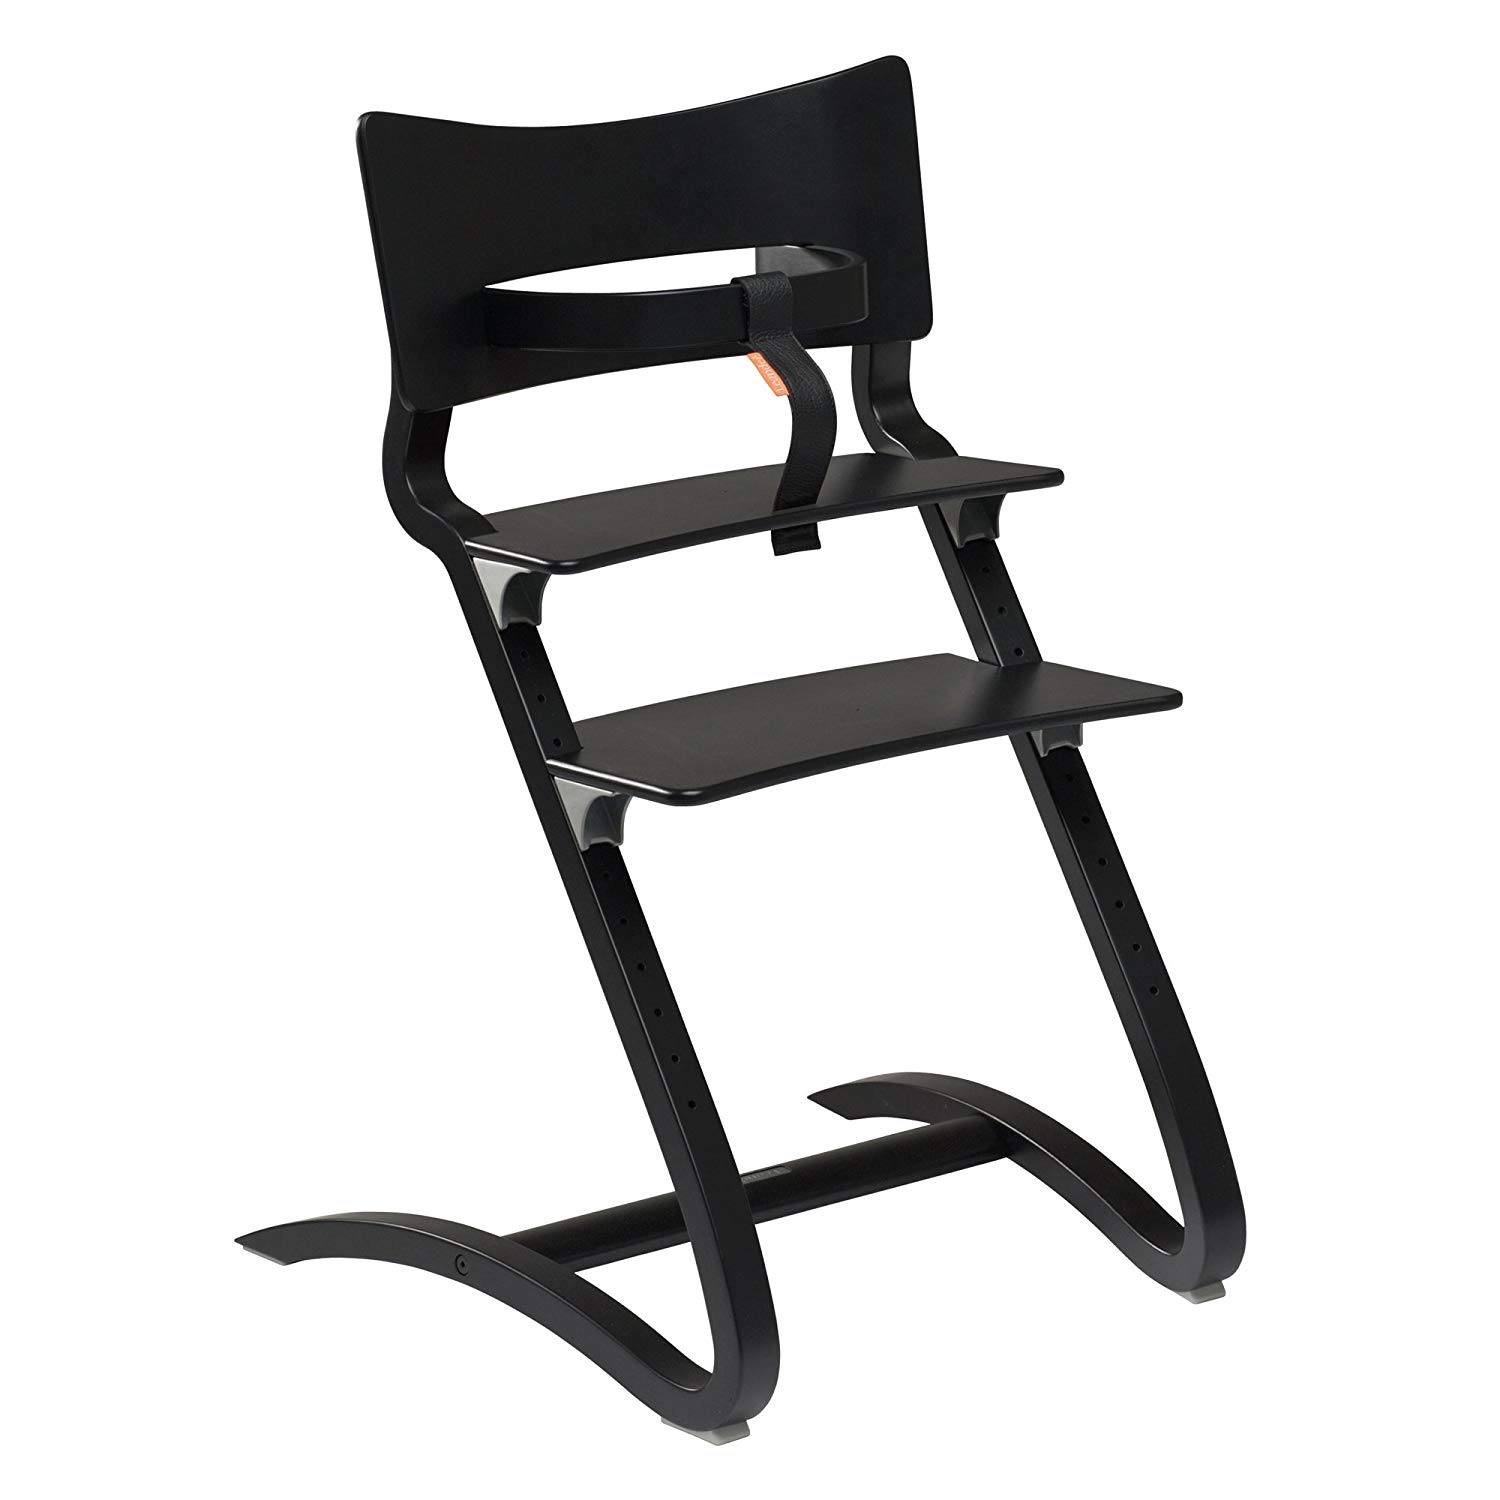 Leander highchair (without safety bar – black